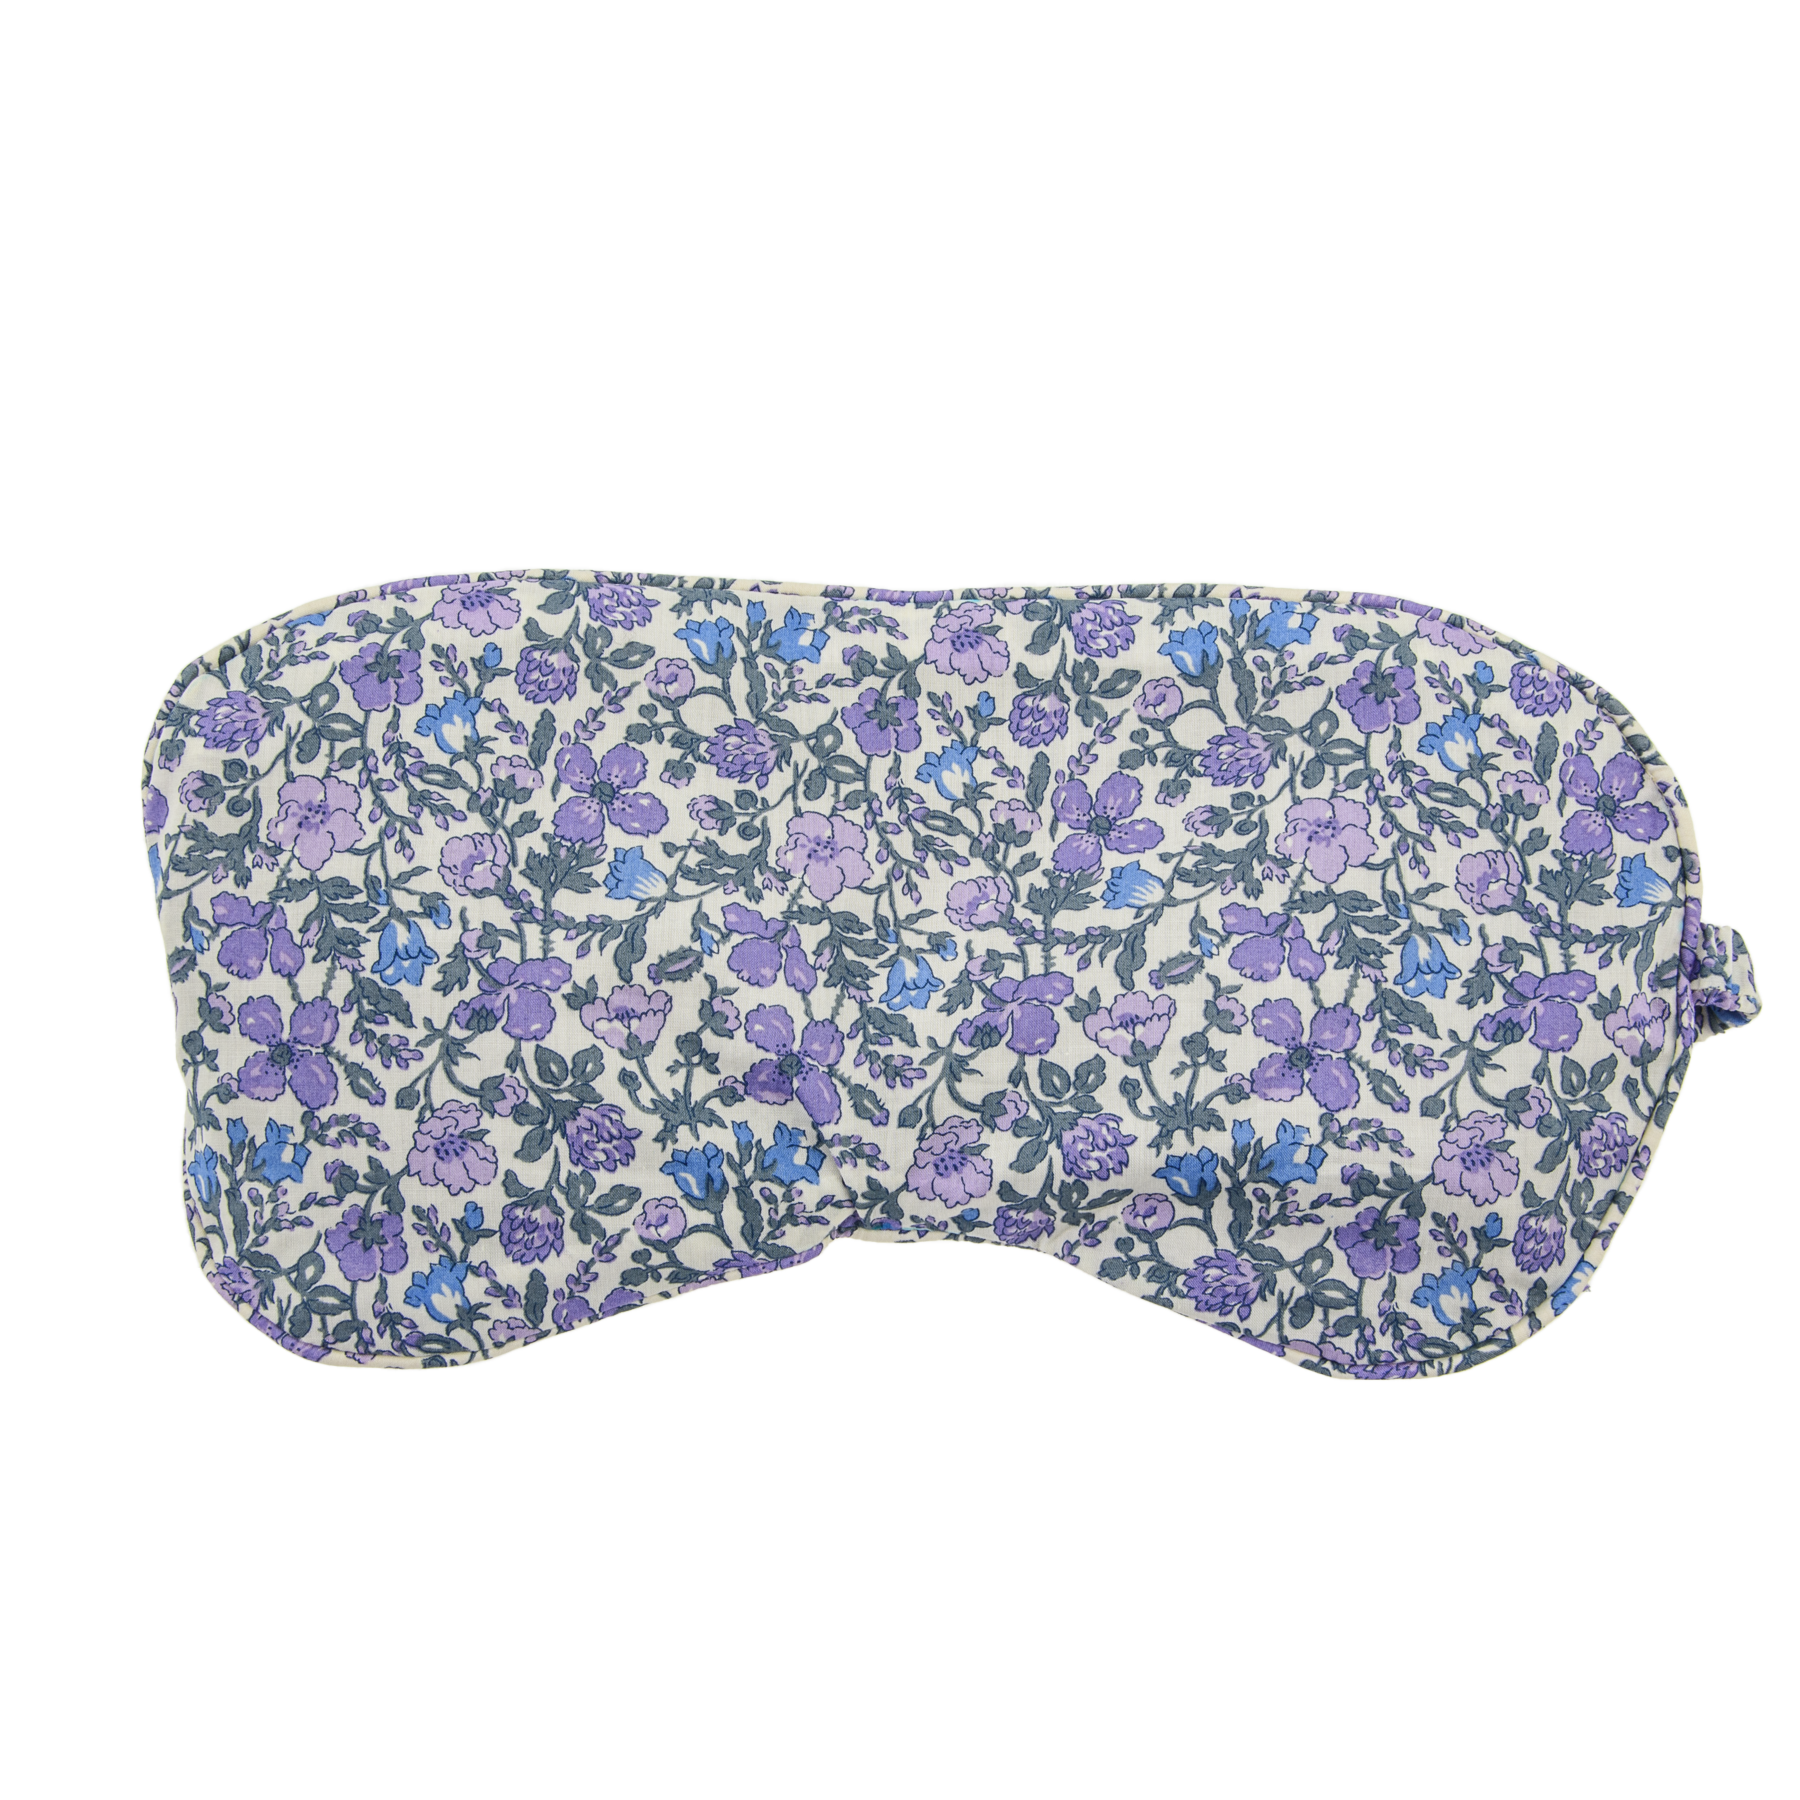 Image of Relaxing Eye masks mw Liberty Meadow Lavender from Bon Dep Essentials